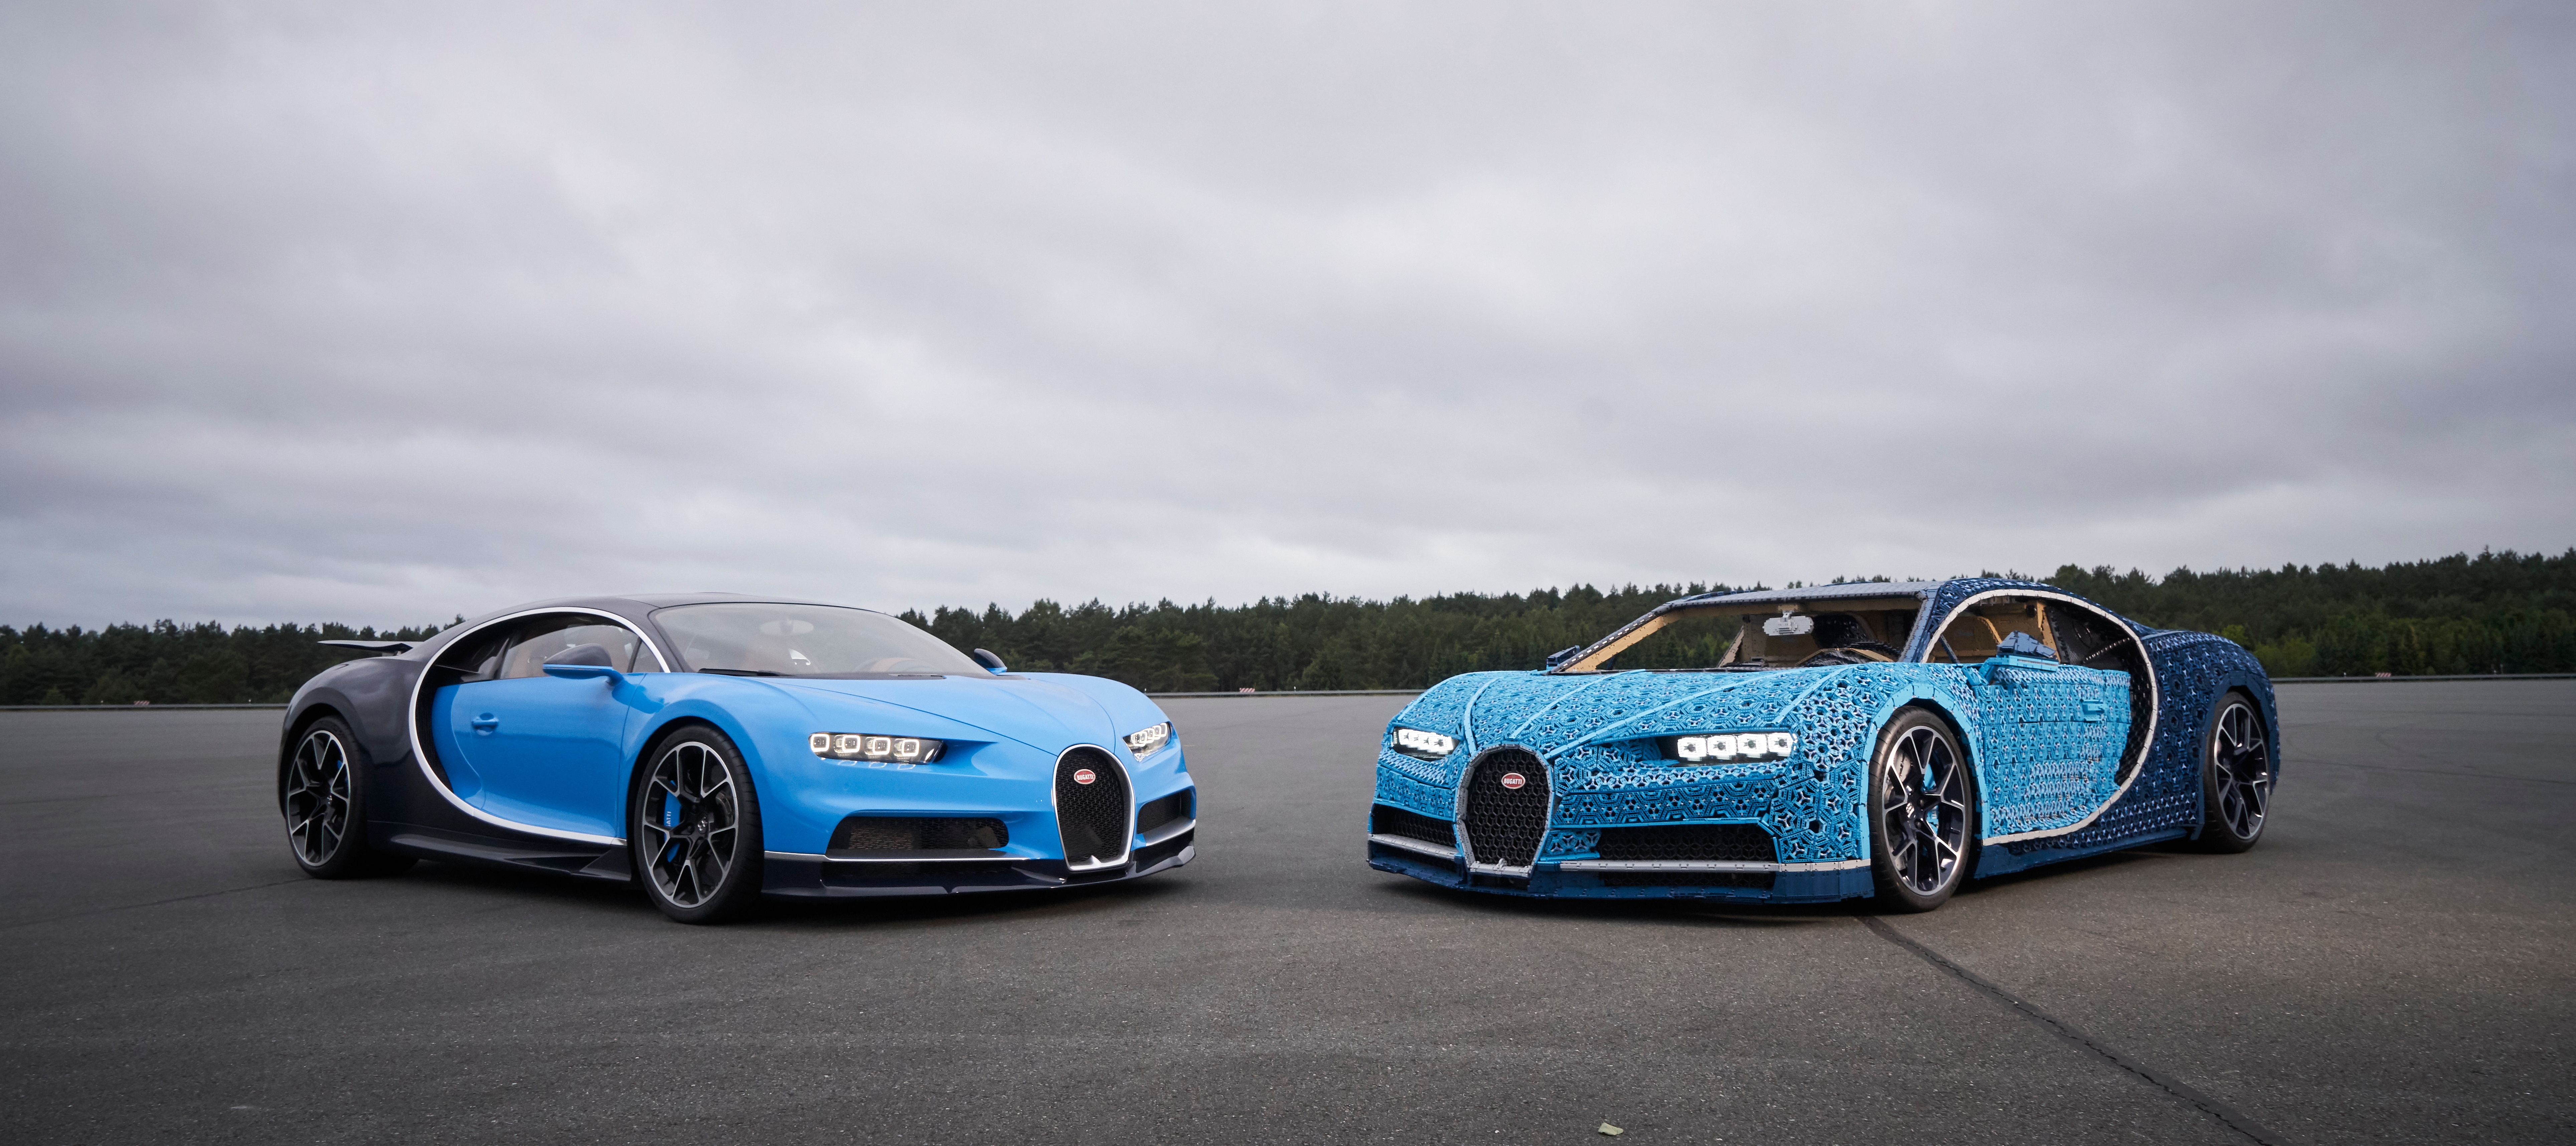 The inside story behind our 1:1 LEGO® Bugatti Chiron, Official LEGO® Shop